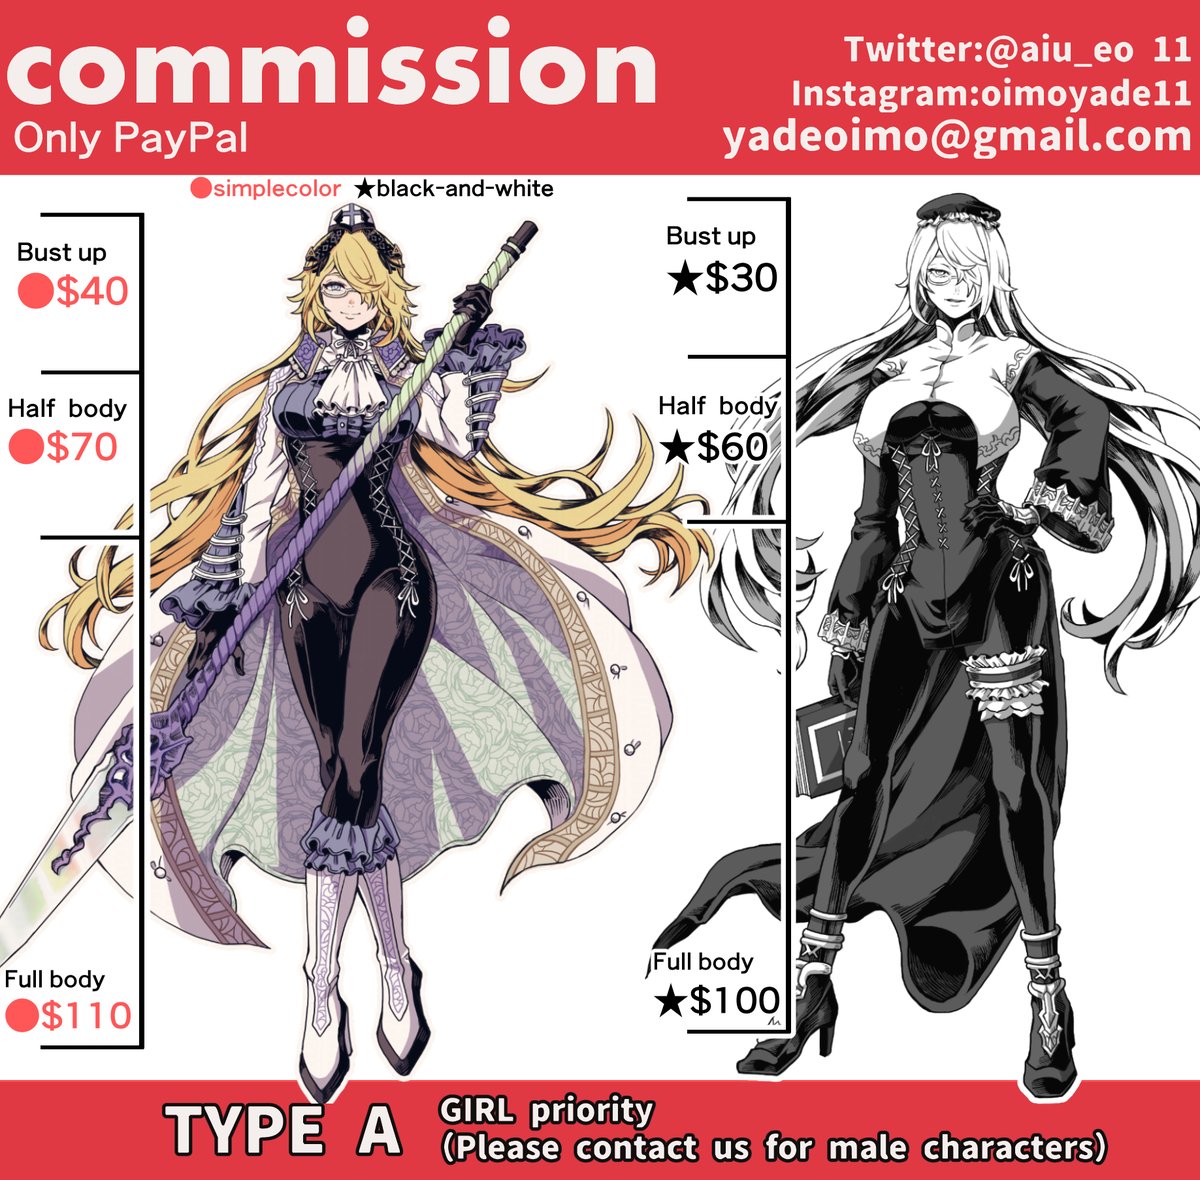 RTs are appreciated?

Commission open!✨

Type:
References:
Character expression/personality:
Paypal mail address:
Other:

Please fill out the sheet and send us a DM or email!【yadeoimo@gmail.com】 